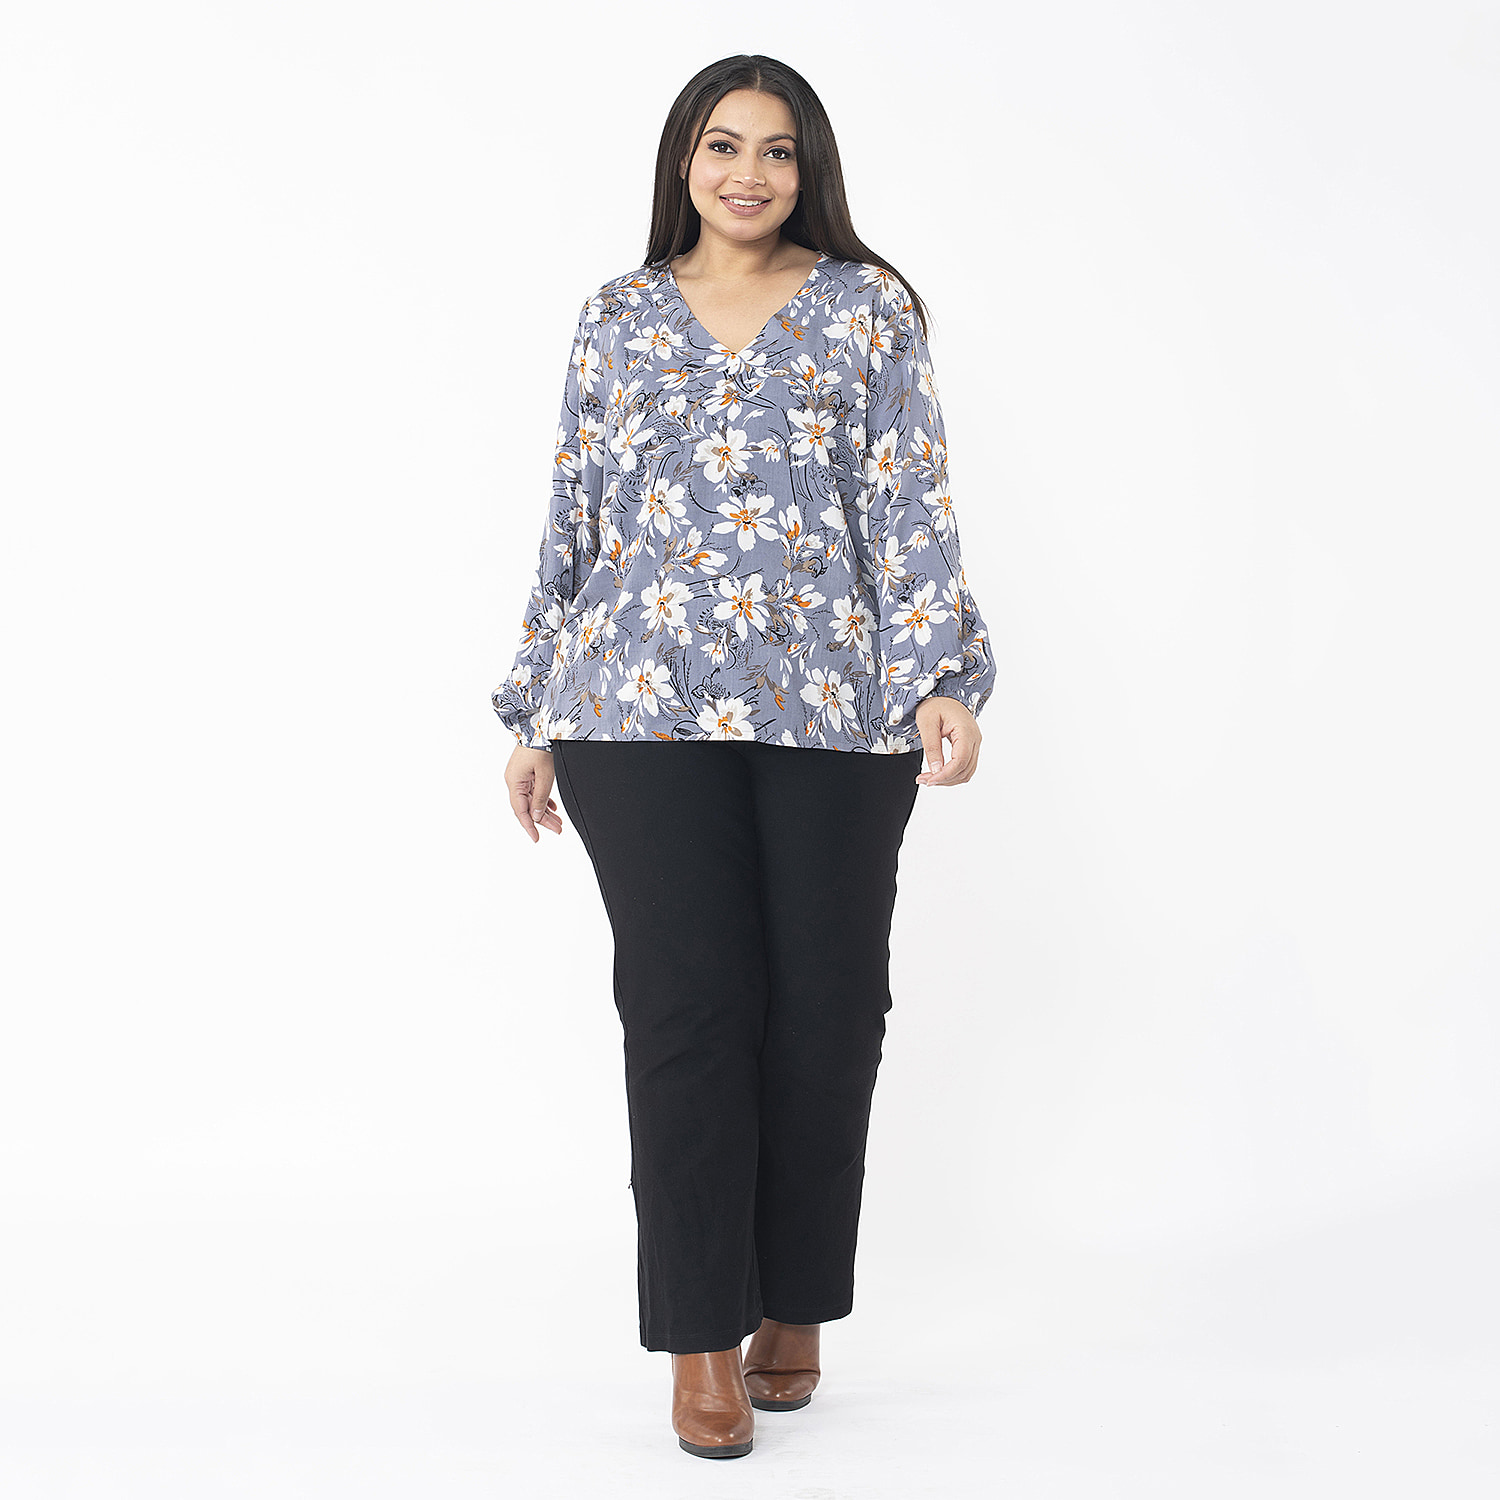 TAMSY 100% Viscose Floral Printed V Neck Full Sleeve Top with Elastic at Cuffs (Size L,16-18) - Grey